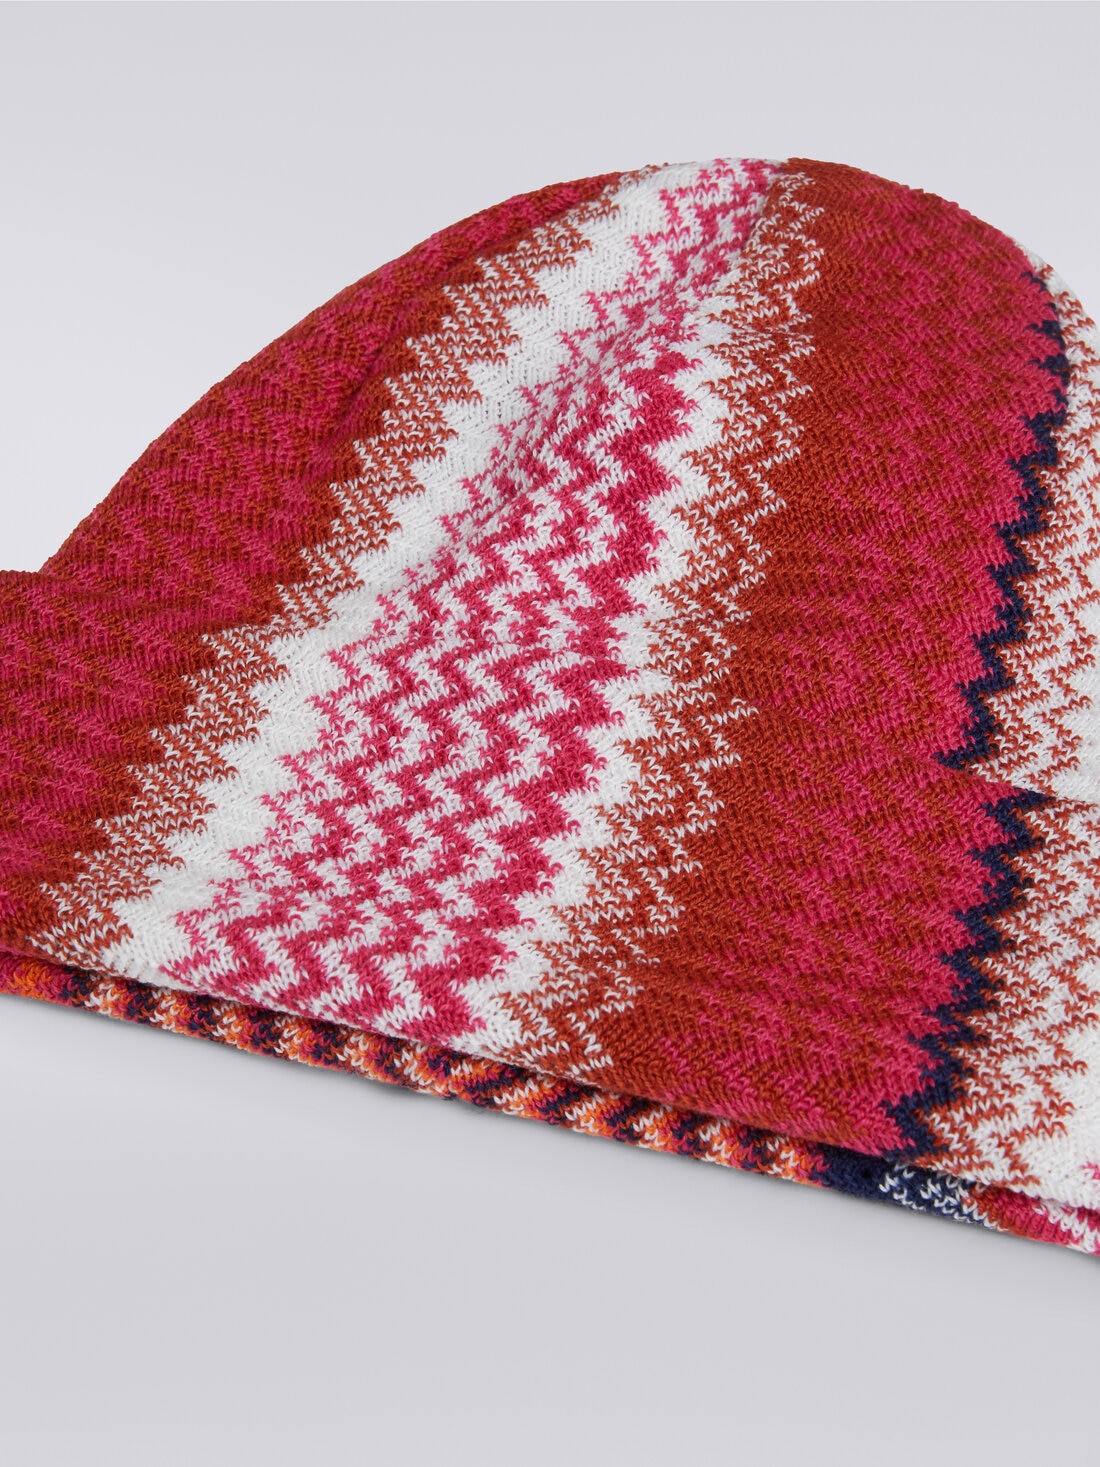 Wool blend hat with zigzag pattern, Multicoloured  - 8053147024080 - 1